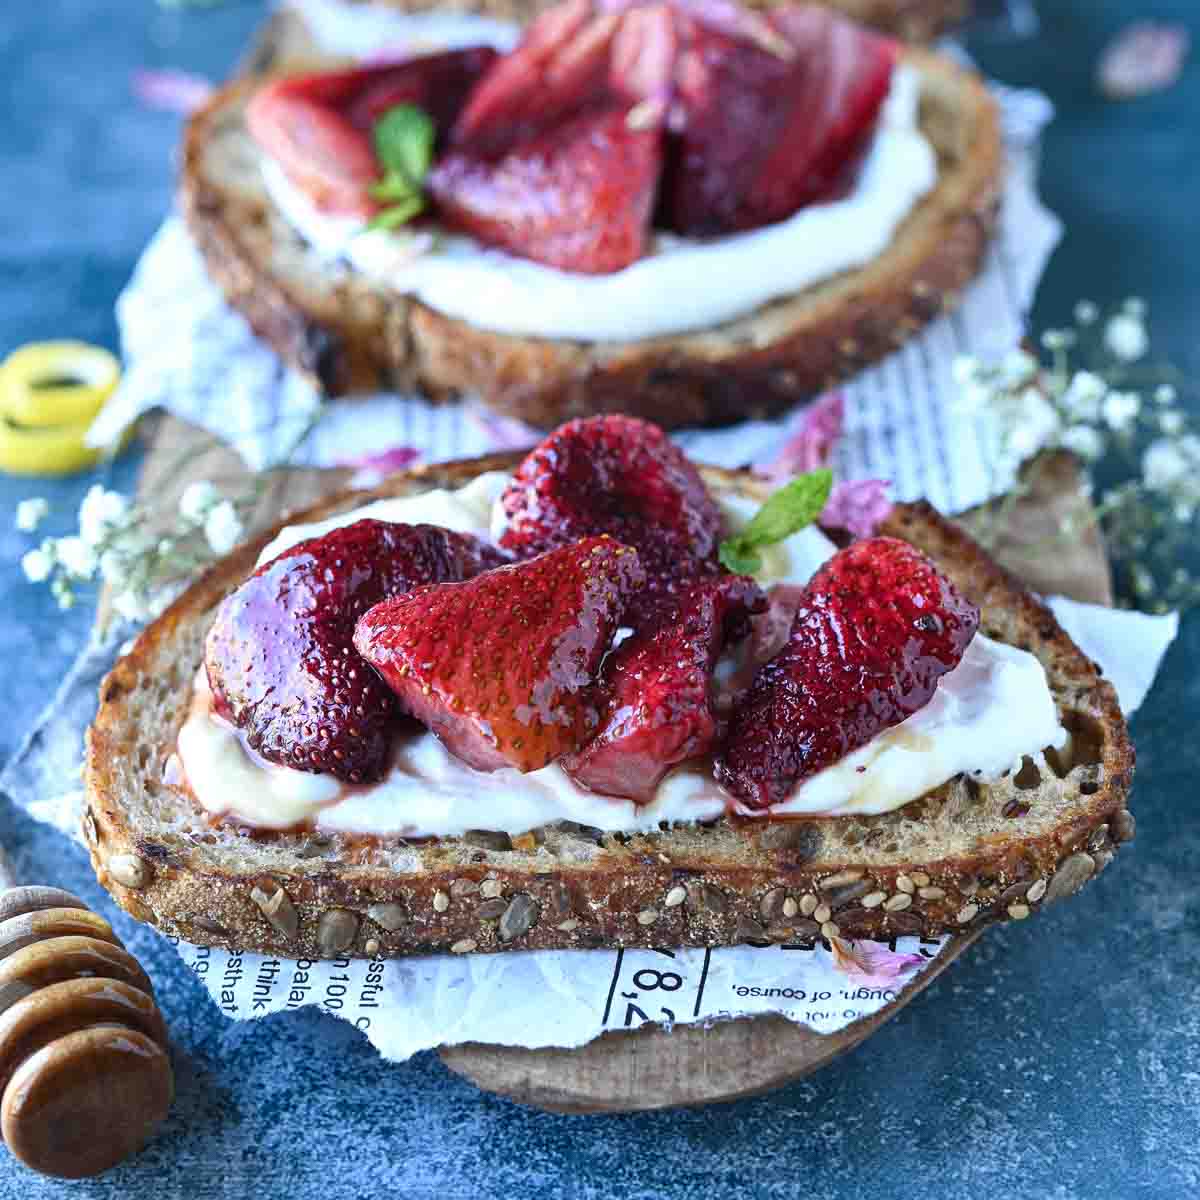 Three gourmet toasts with roasted strawberries and labneh on a blue surface.